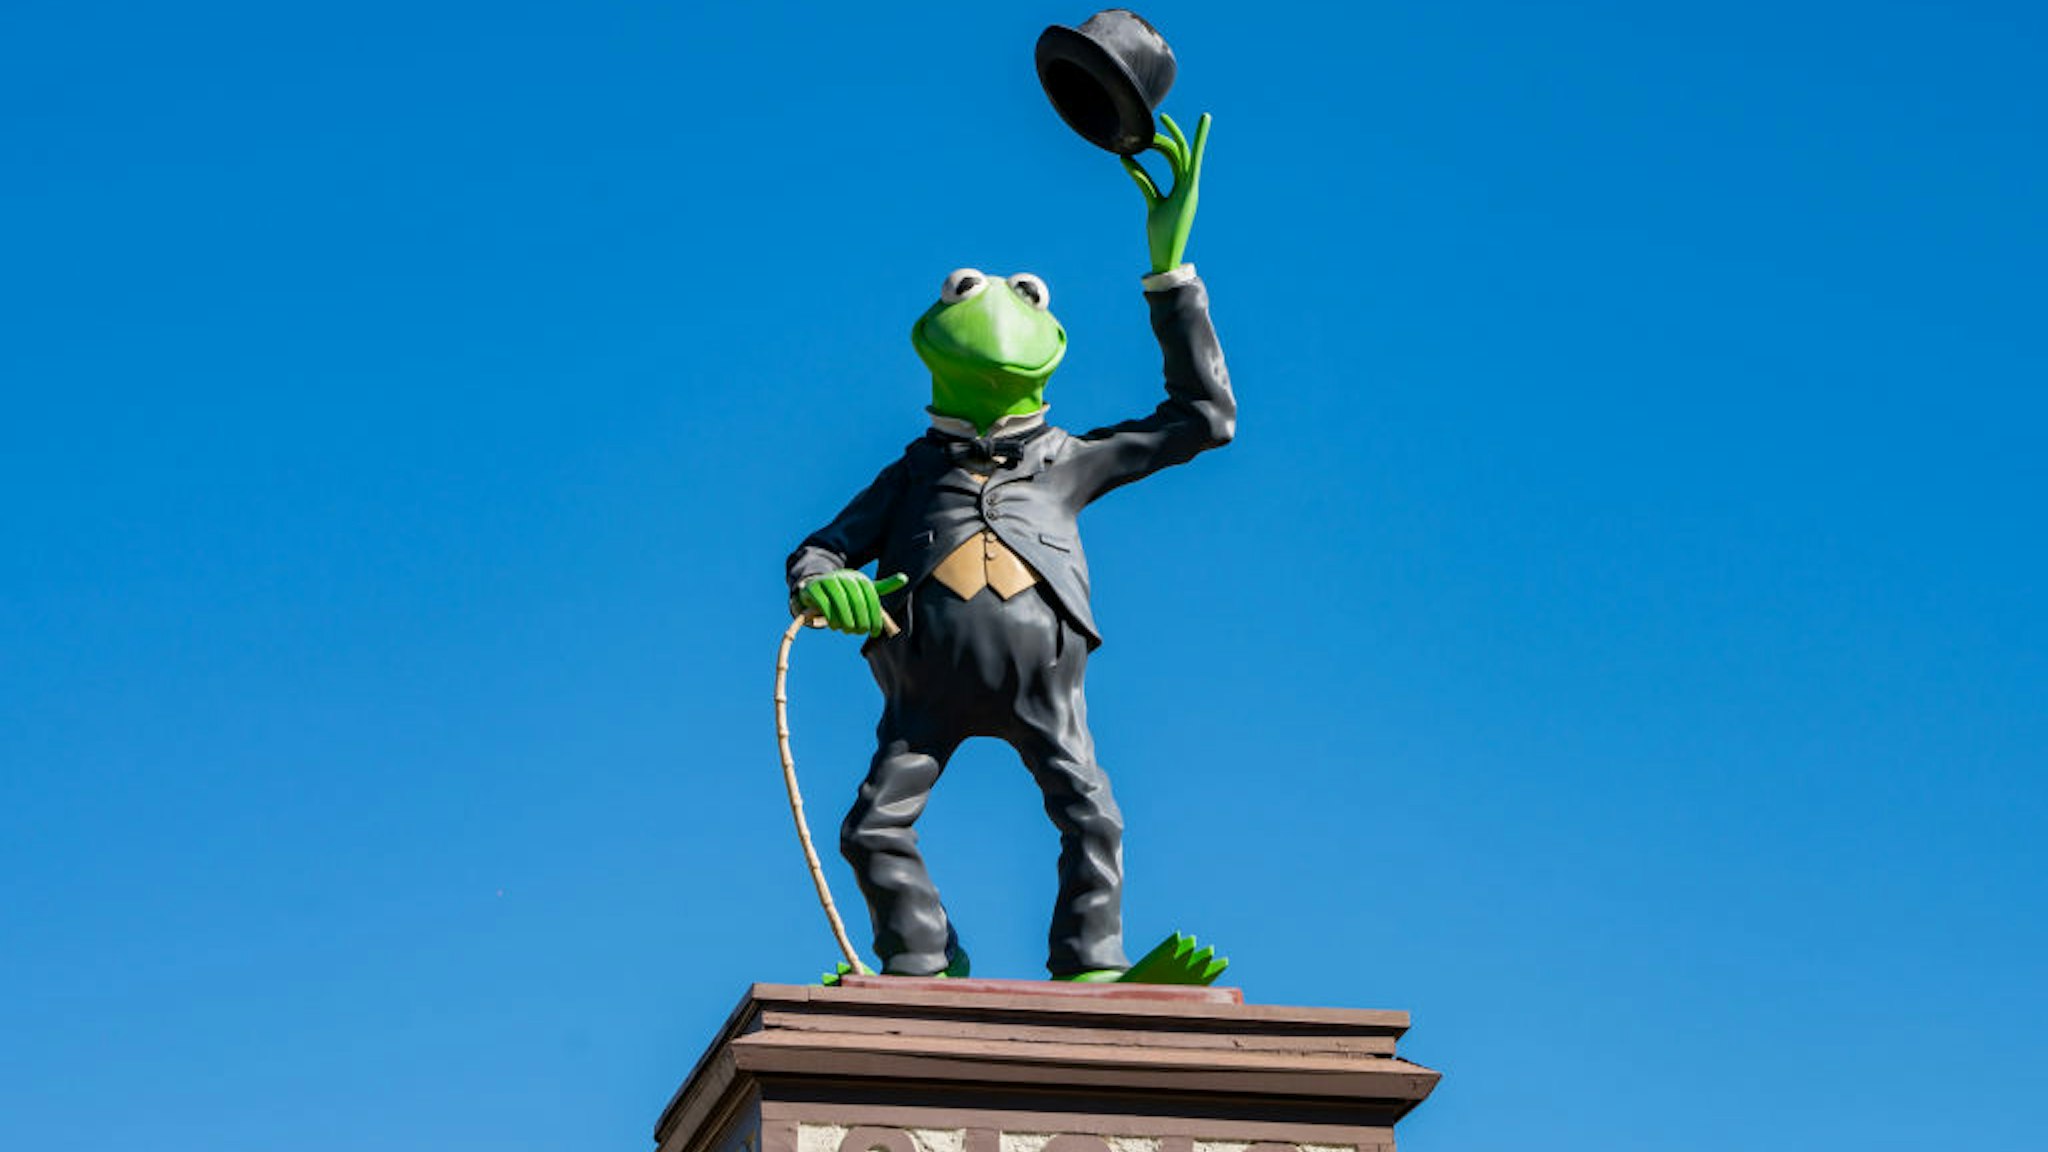 HOLLYWOOD, CA - FEBRUARY 22: General views of Kermit the Frog above the Jim Henson Company studio lot on February 22, 2021 in Hollywood, California. The Jim Henson Company created 'The Muppet Show' which is currently streaming on Disney+.